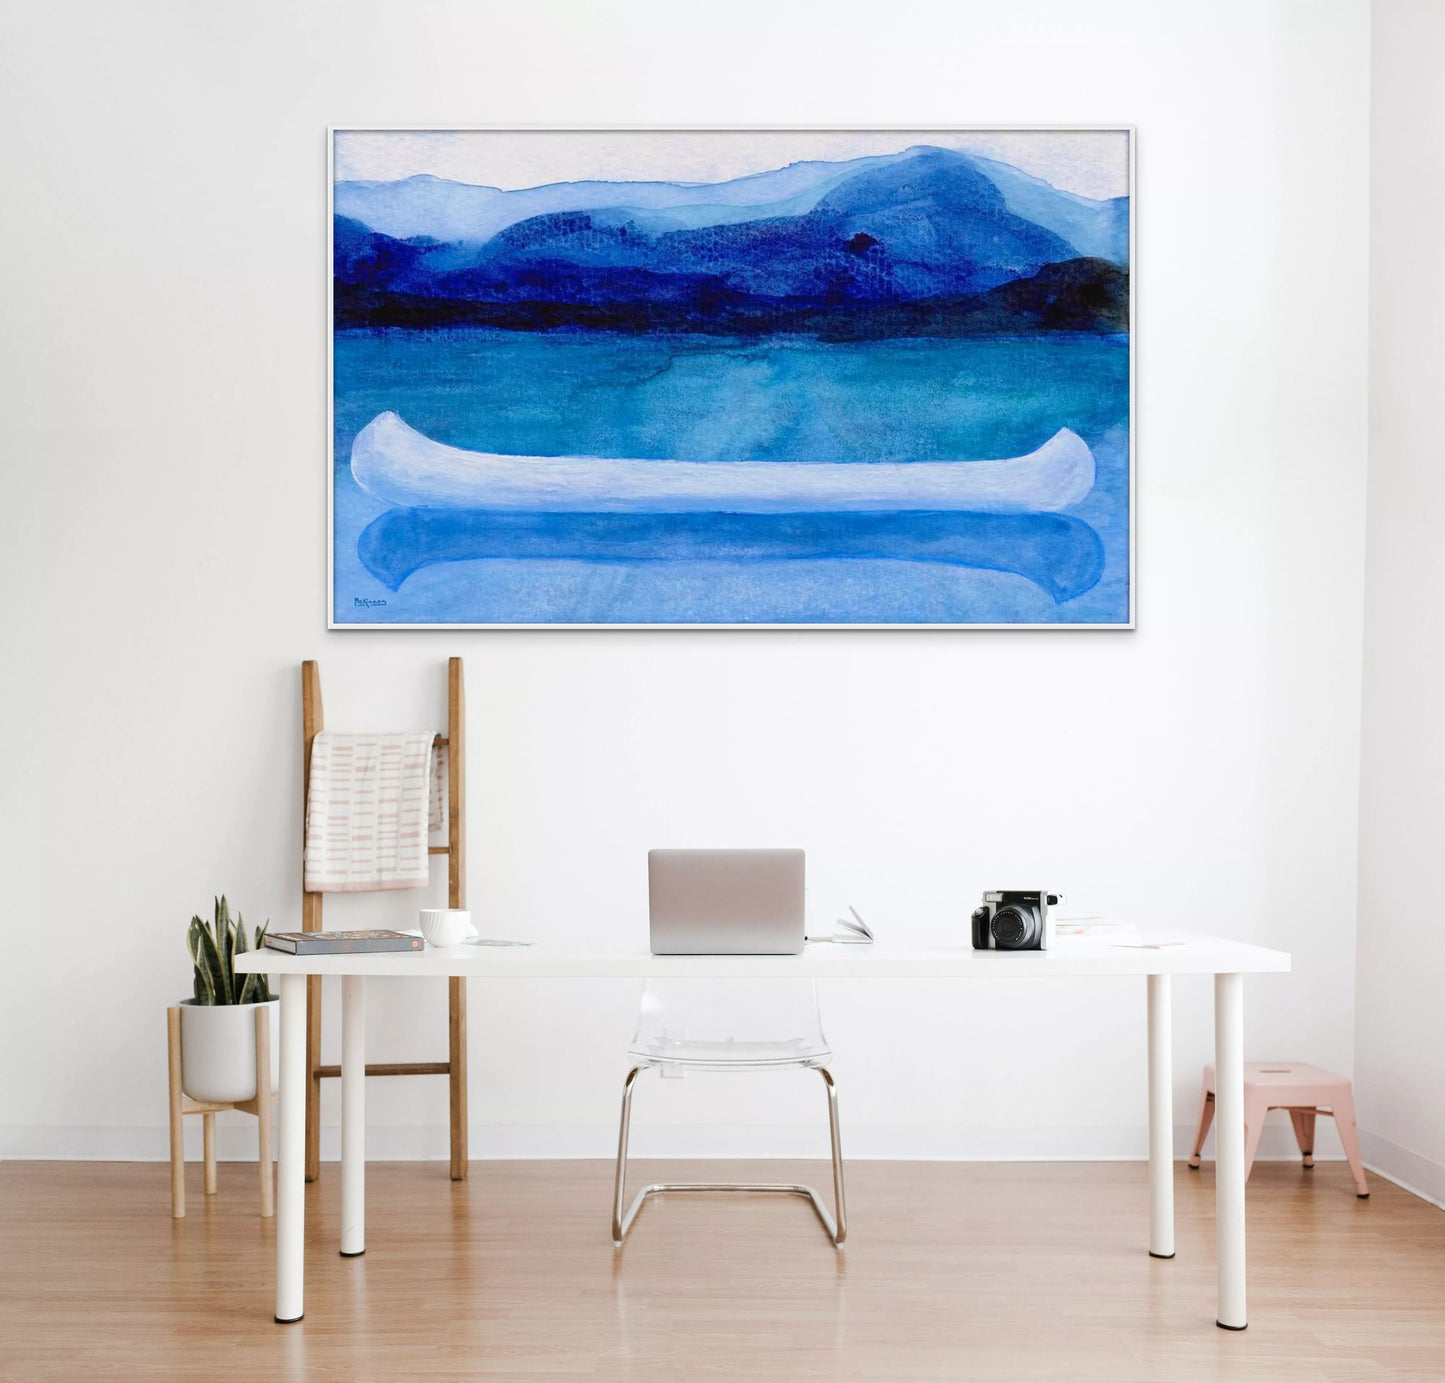 Unique Art for Lake House Decor, Original Paddling Boat Watercolor Painting, Contemporary Blue Water Canvas Print